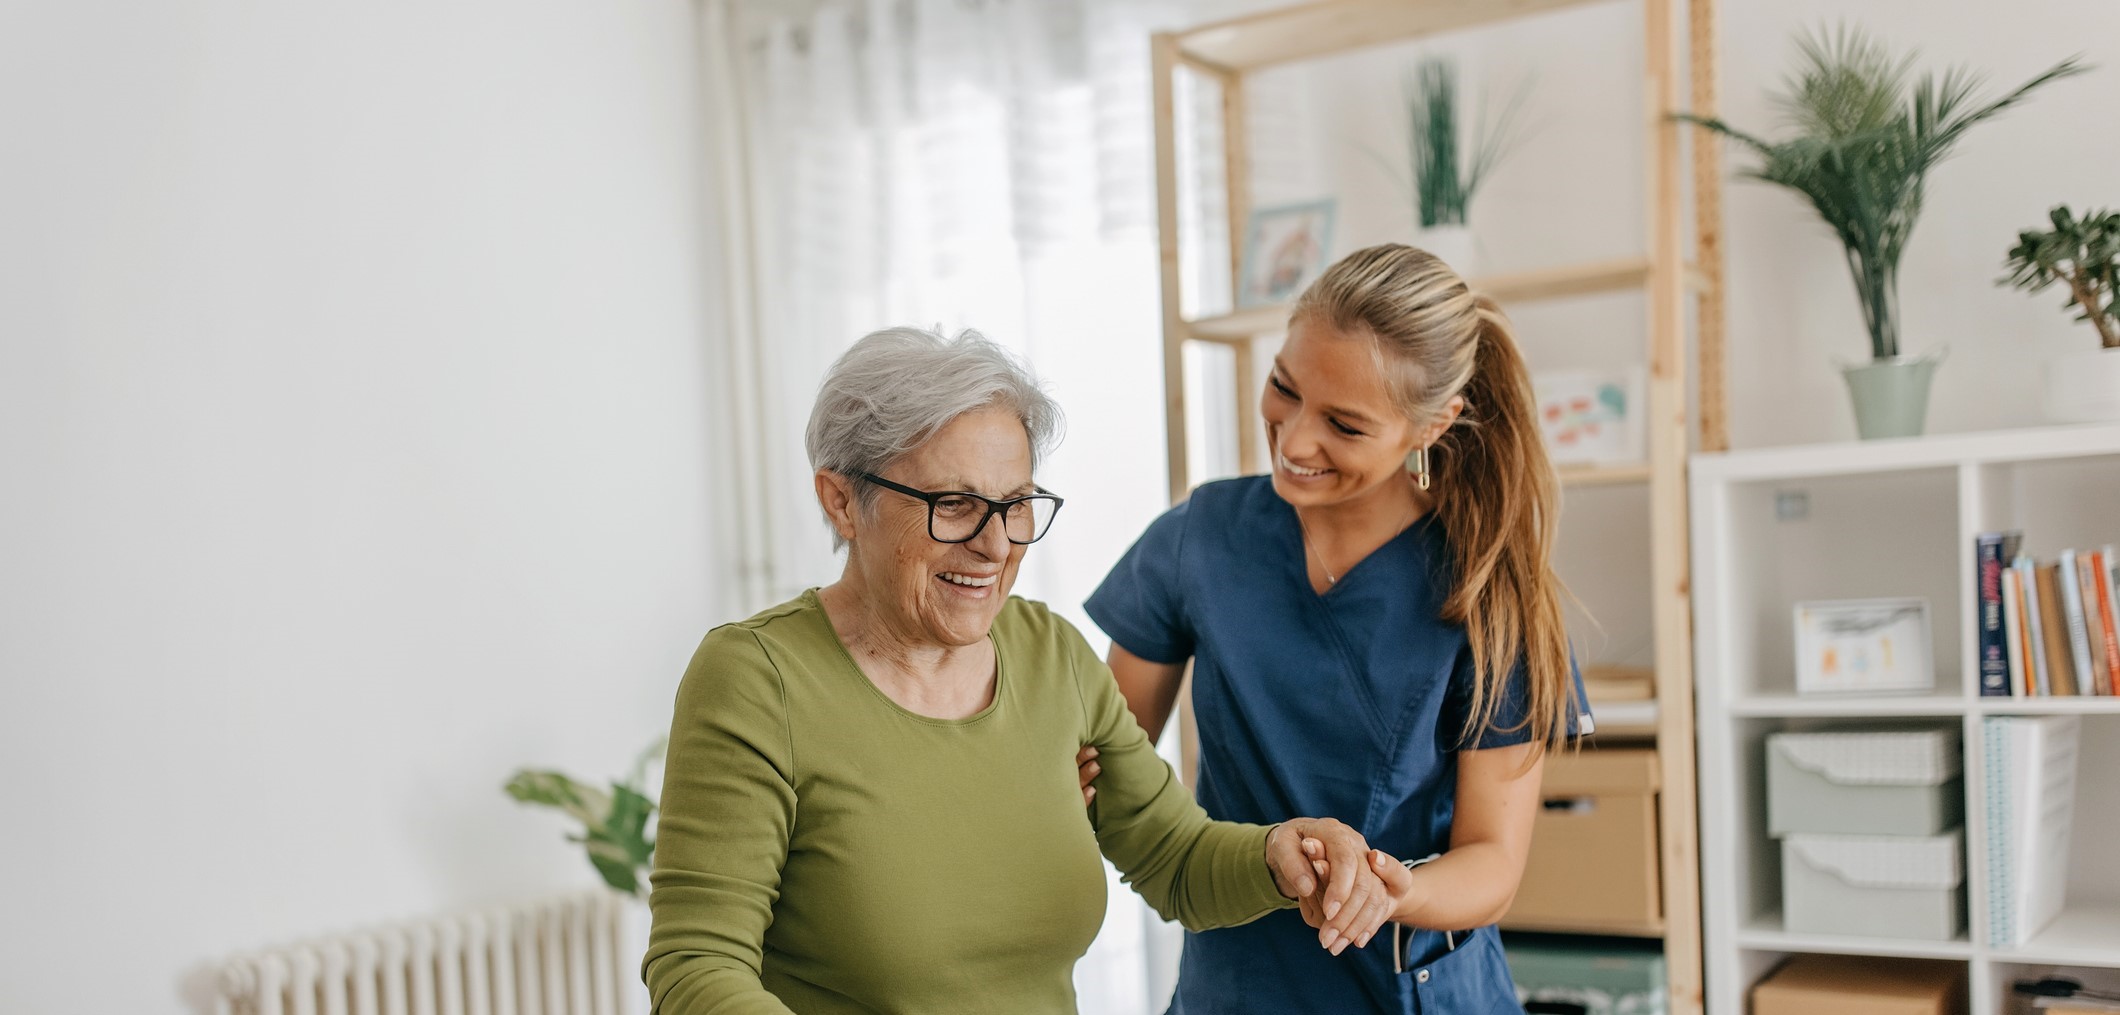 A smiling white elderly woman walking indoors with a cane is assisted by a white female care taker